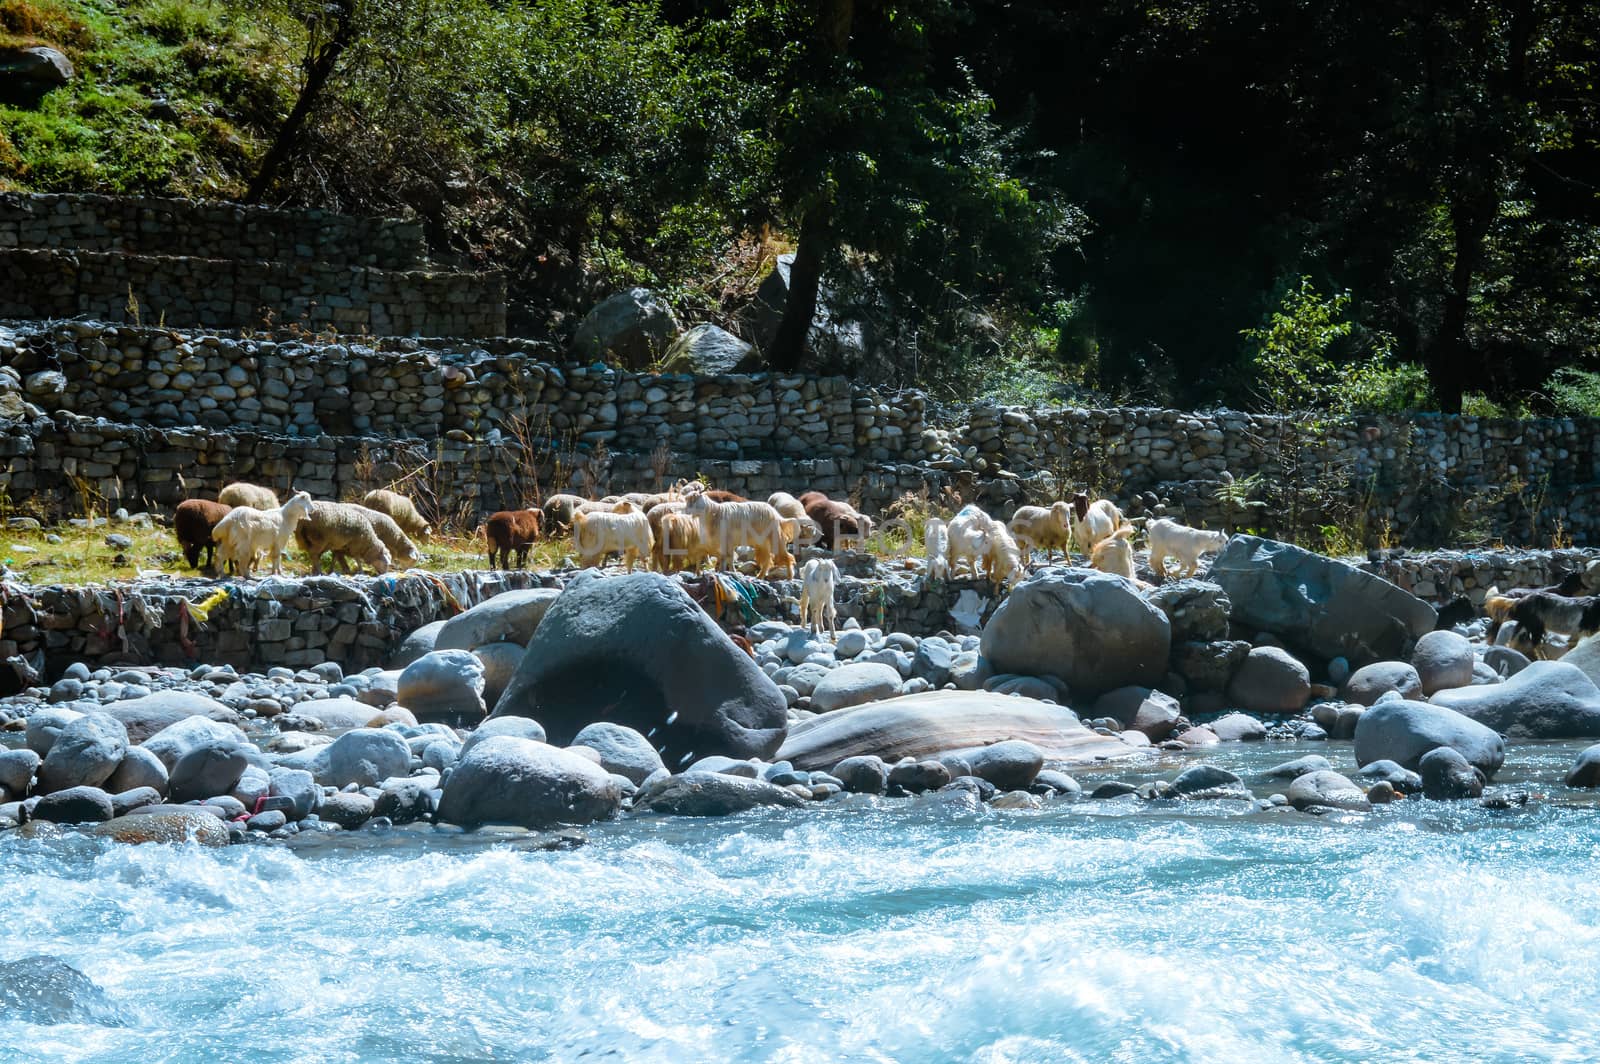 A group of Himalayan big-horned sheep goat on the lakeside of BEAS river. View of domestic herd of animal from agriculture farm of a small village of Asian Himalaya mountain valley, India, Asia.